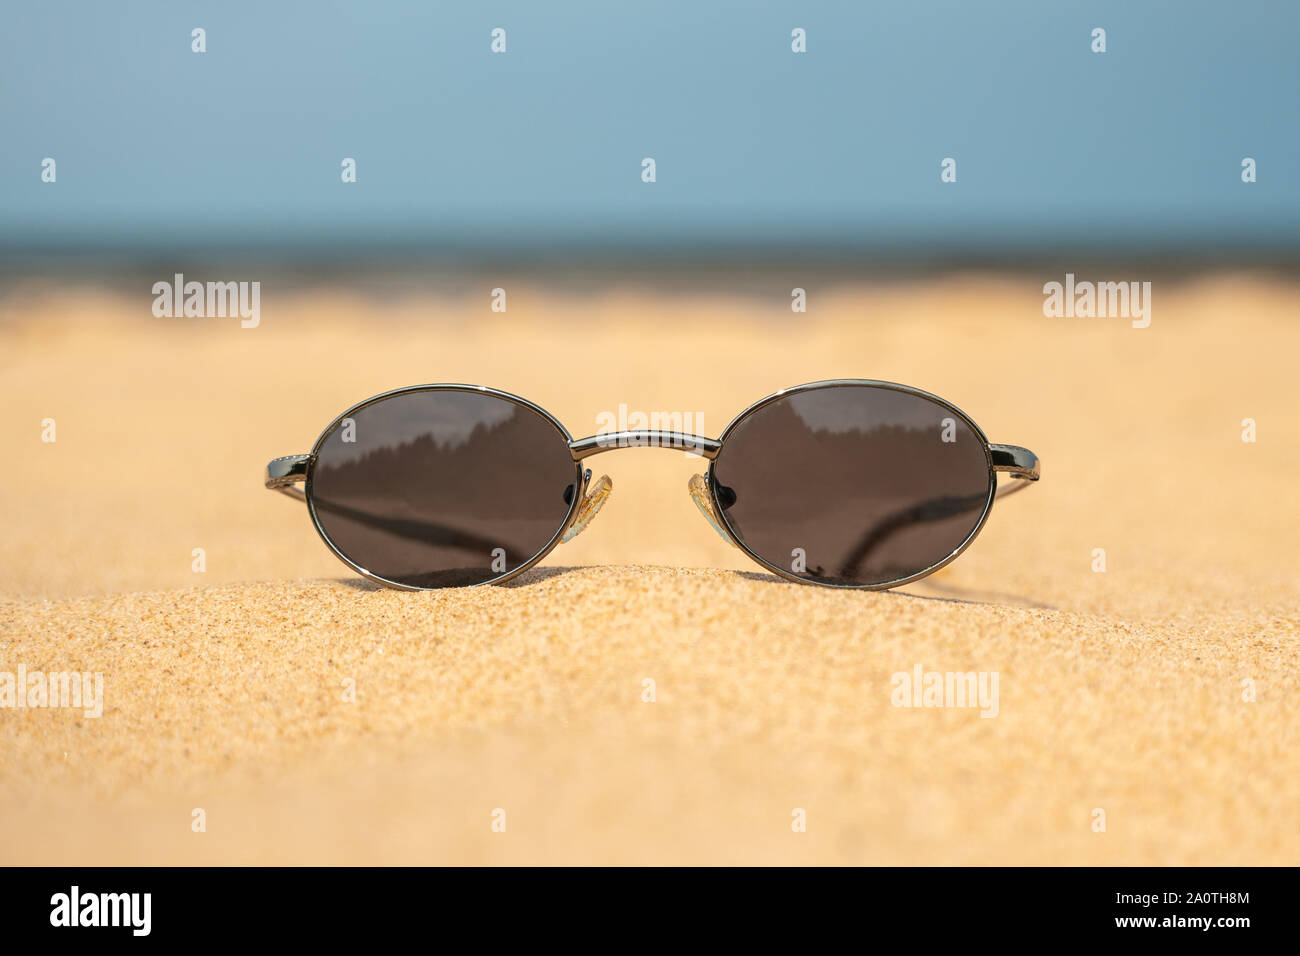 Sunglasses on beach sand with view to sea. The beach holiday is the ideal of vacations - what nearly every traveler whether young or old dreams of. Stock Photo